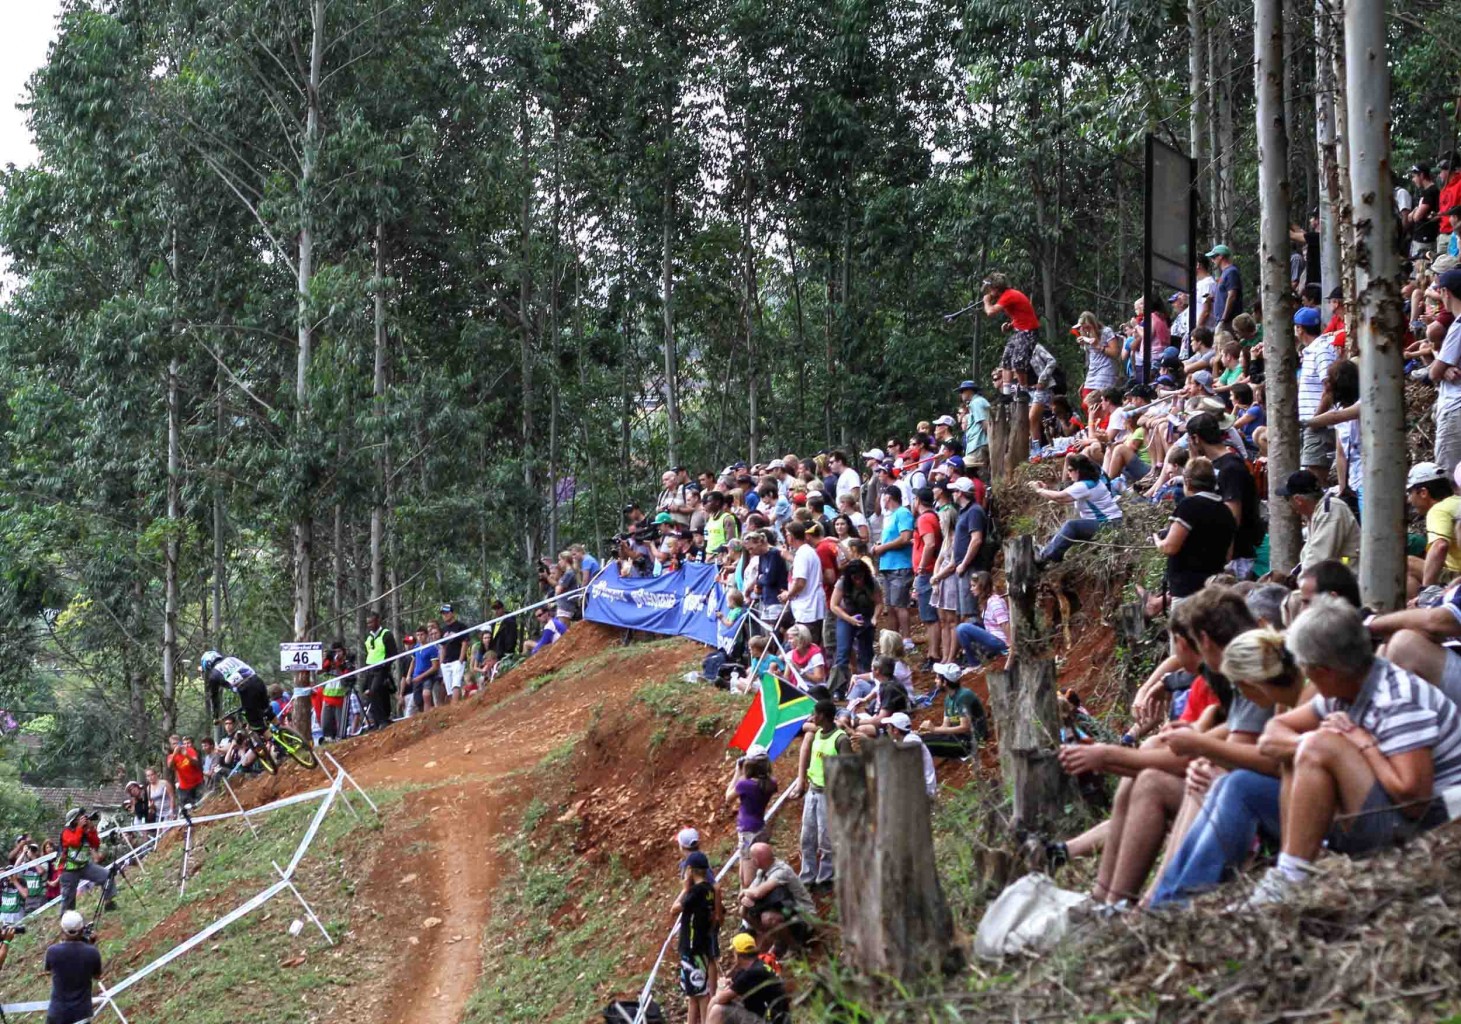 A large crowd is expected to gather at Cascades MTB park in Pietermaritzburg to cheer on the 424 South African entries of the impressive 581 that have been submitted ahead of the UCI MTB Masters World Championships which take place from 21-25 August. Photo: Darren Goddard/ Gameplan Media